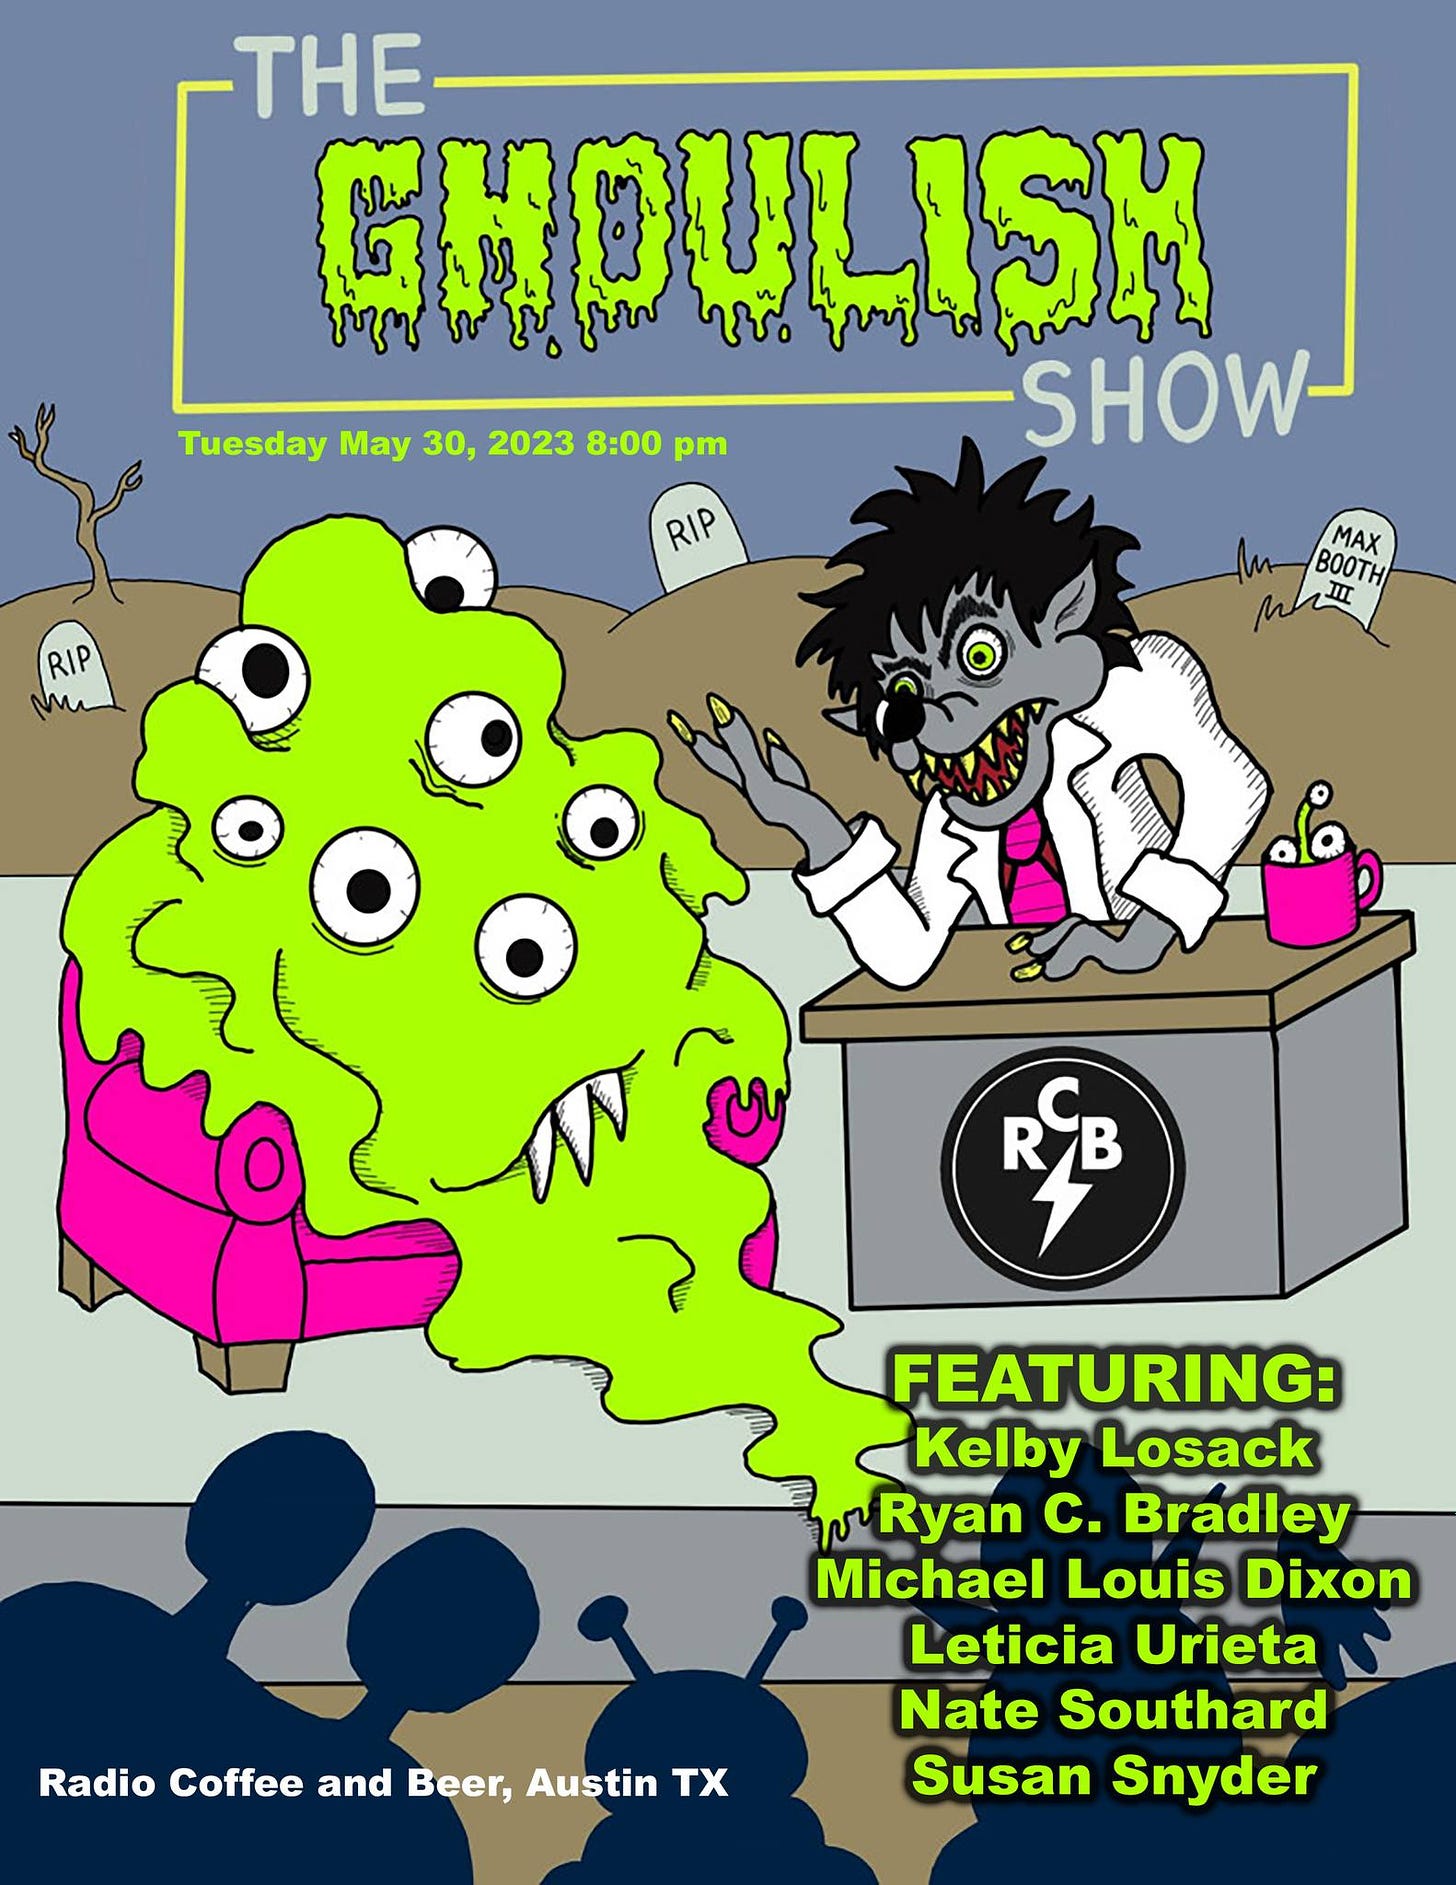 May be an image of text that says 'THE GHOULISH SHOW Tuesday May 30, 2023 8:00 pm RIP RIP RIP BOOTH I RCB FEATURING: Kelby Losack Ryan c. Bradley Michael Louis Dixon Leticia Urieta Nate Southard Susan Snyder Radio Coffee and Beer, Austin TX'